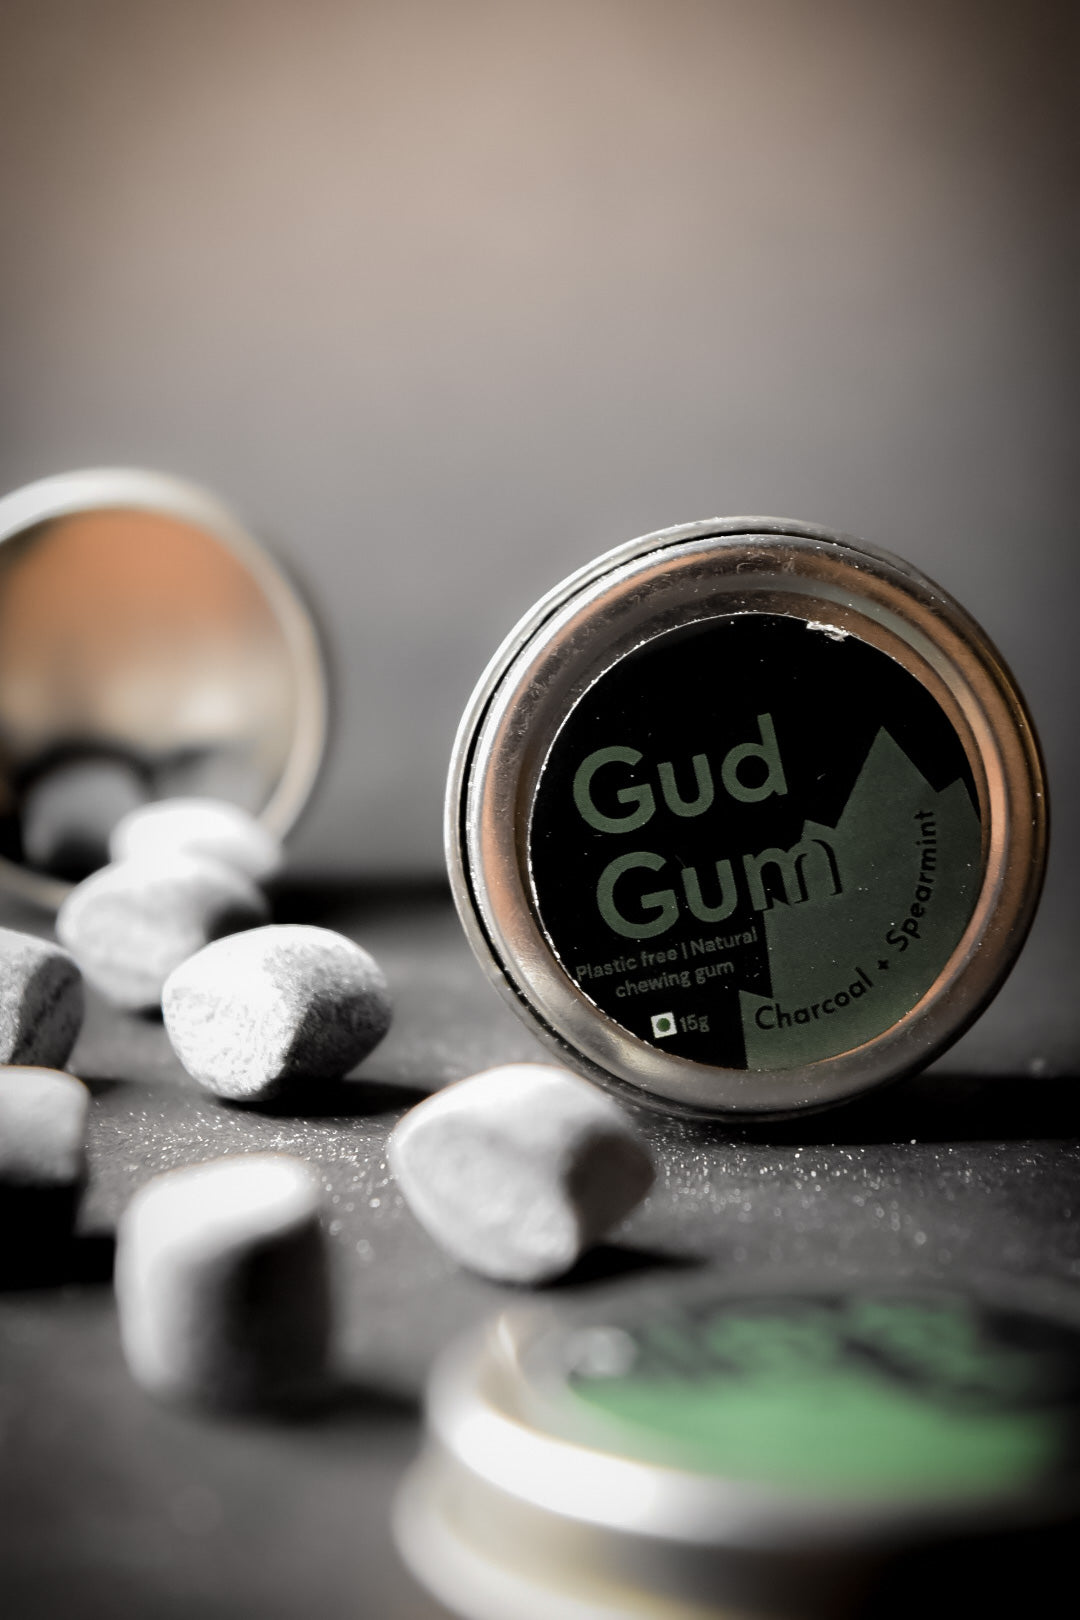 Gud Gum Tin Mini Pack - Plastic Free, Sugar Free, Natural, Biodegradable, Vegan Chewing Gums | No added colours and flavours- (10 pieces per pack)- 15g - Tin Packaging- 1 pack per flavour